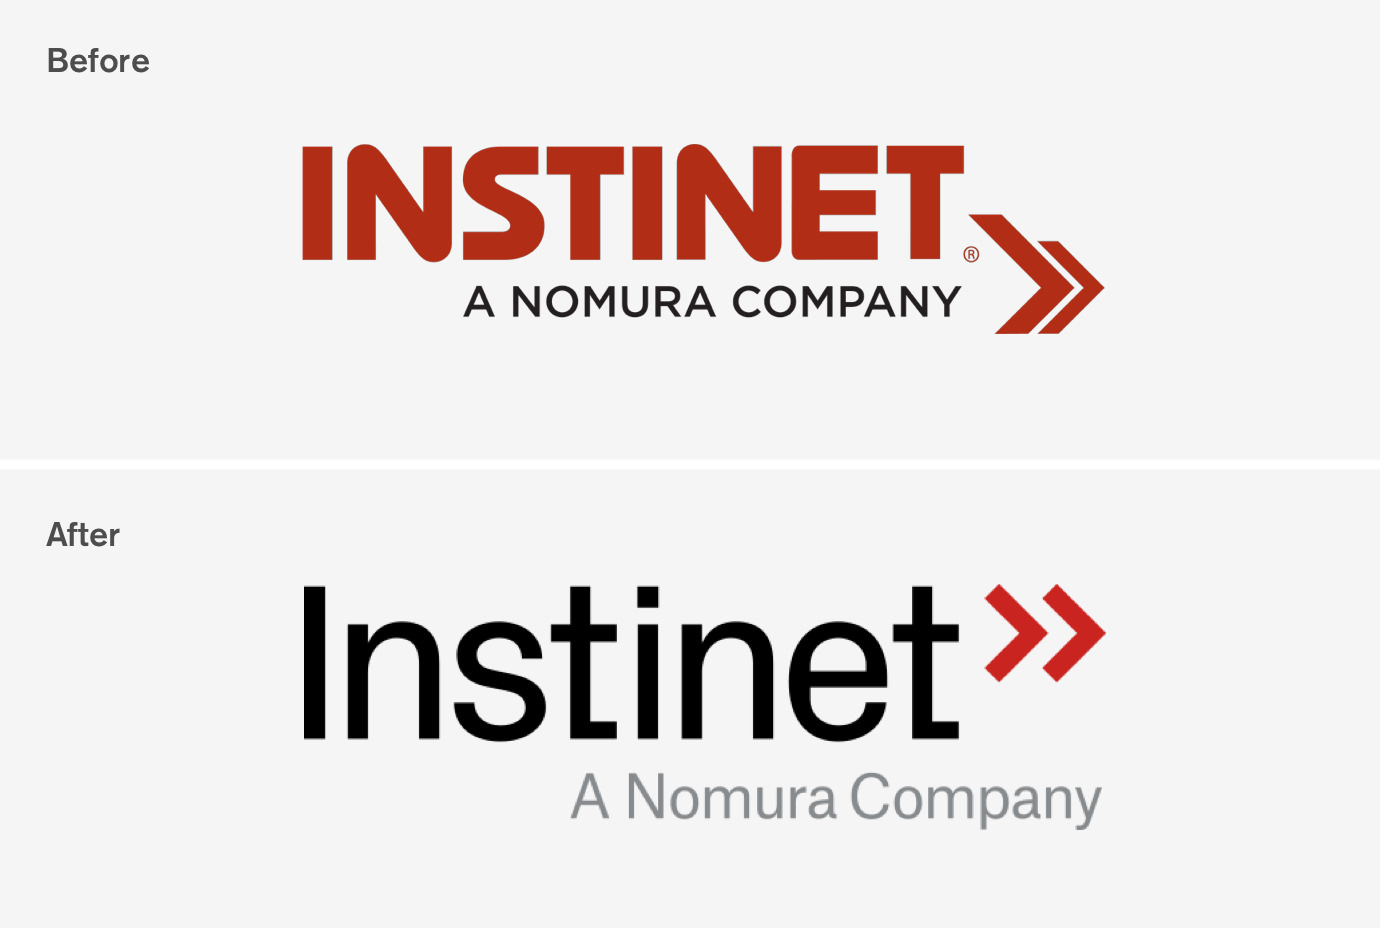 A side-by-side comparison of the old and new Instinet logos showing the refinements made by Thinkso designers.